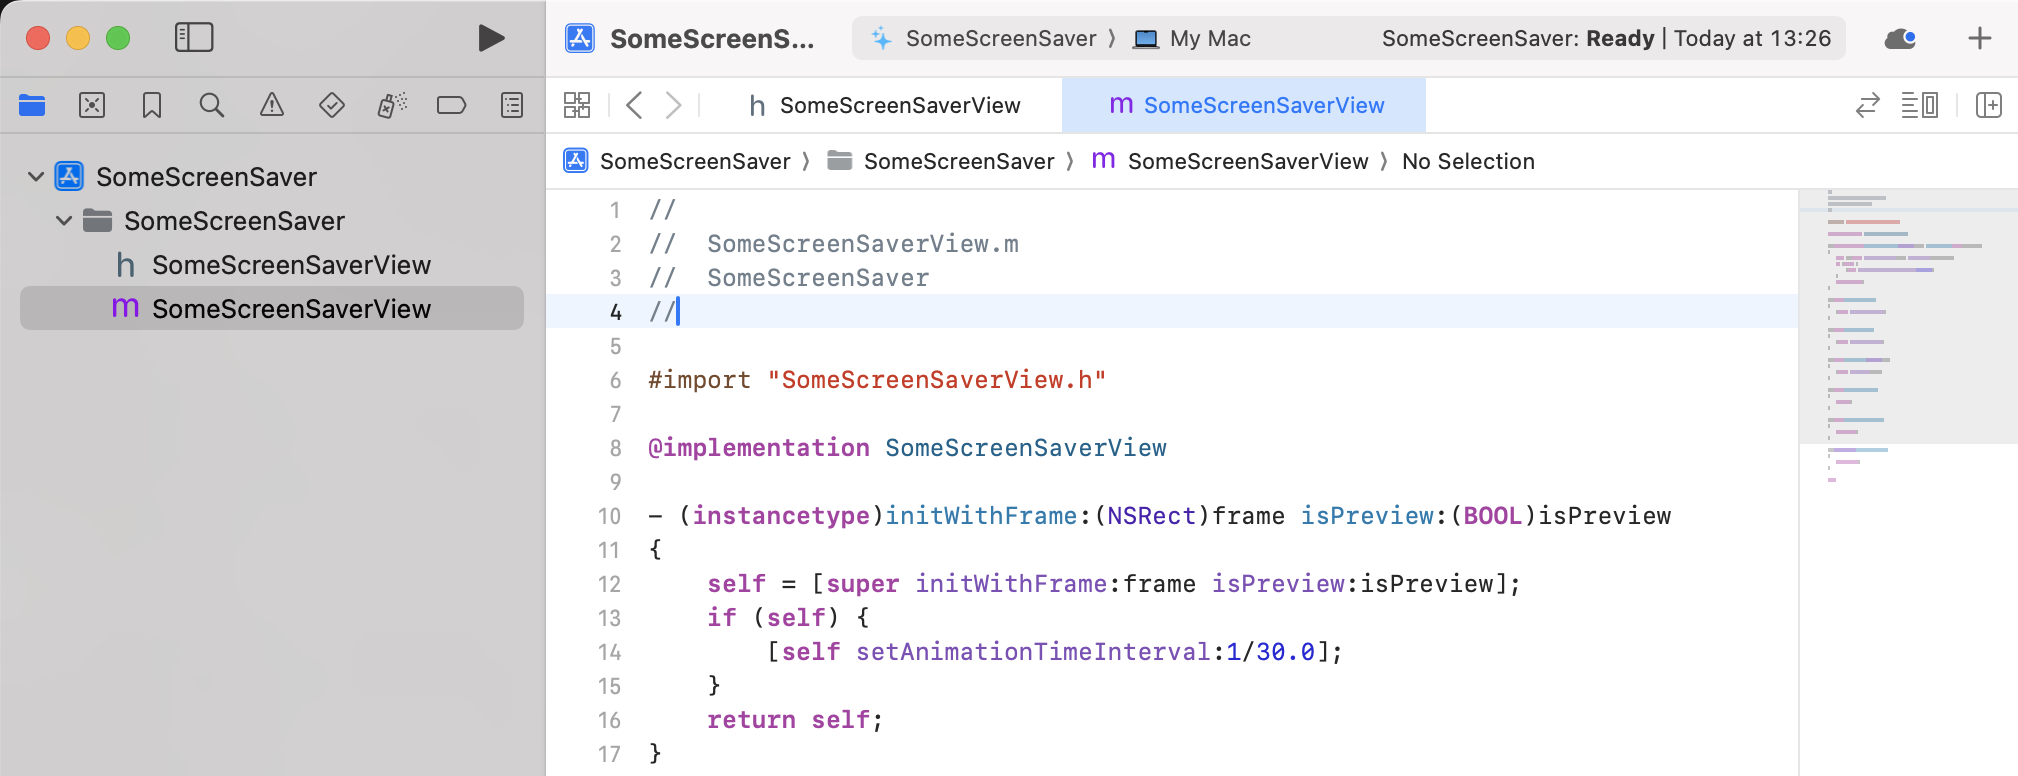 The freshly generated Xcode project with an Objective-C implemented ScreenSaverView